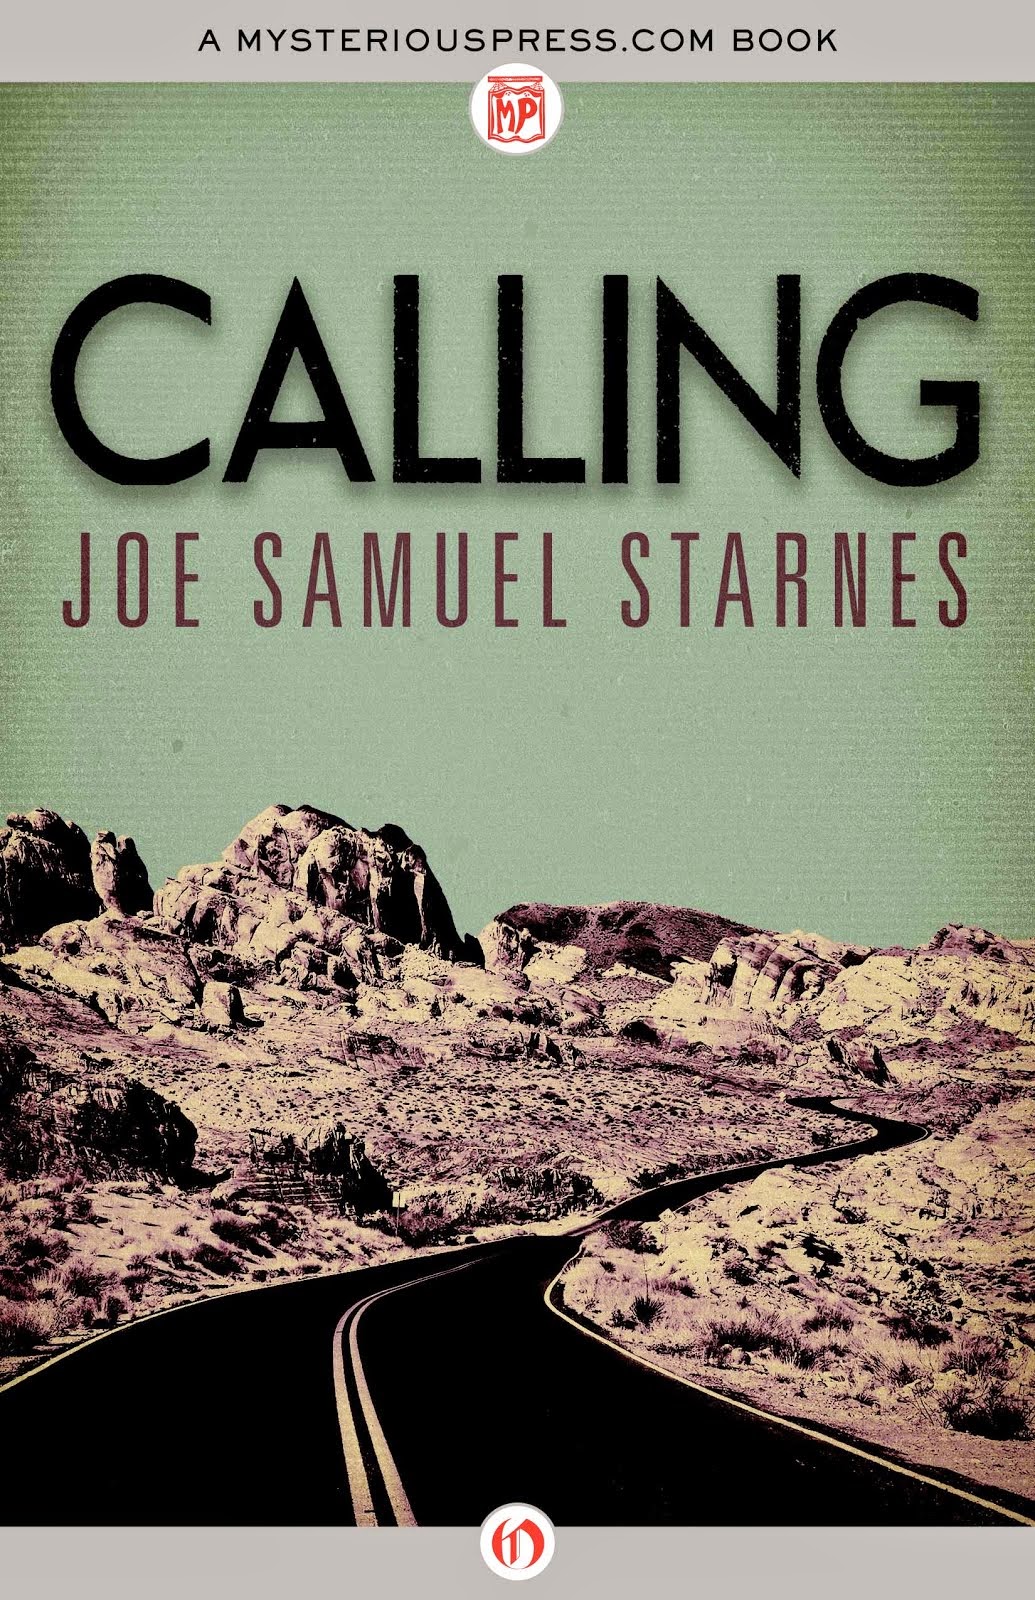 About Calling